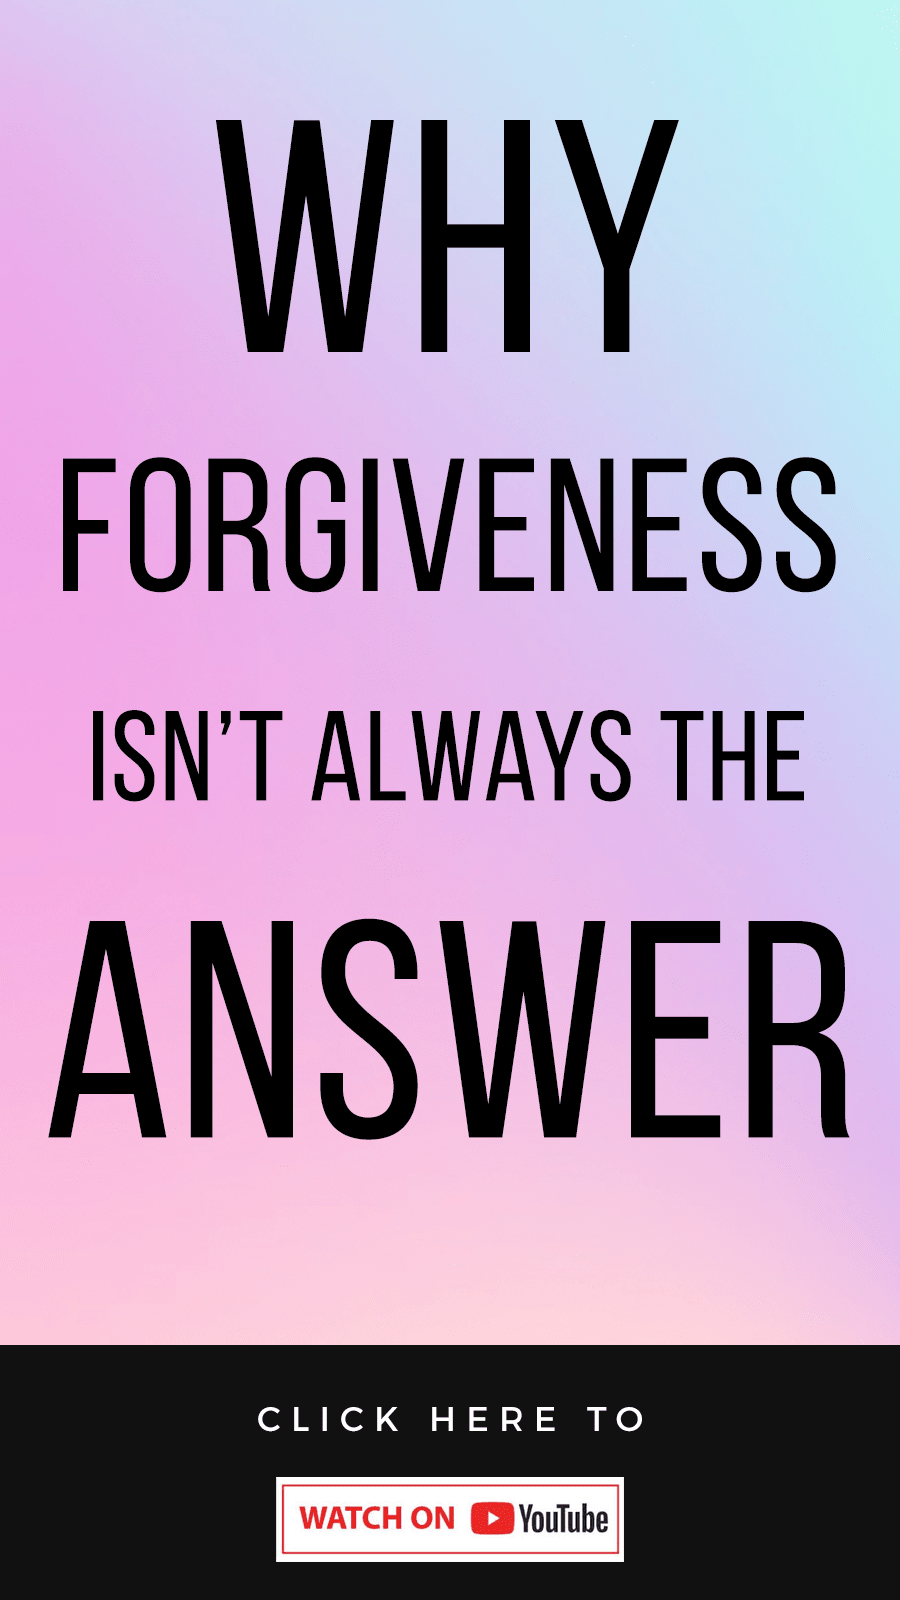 holographic background with text Why Forgiveness Isn't Always The Answer